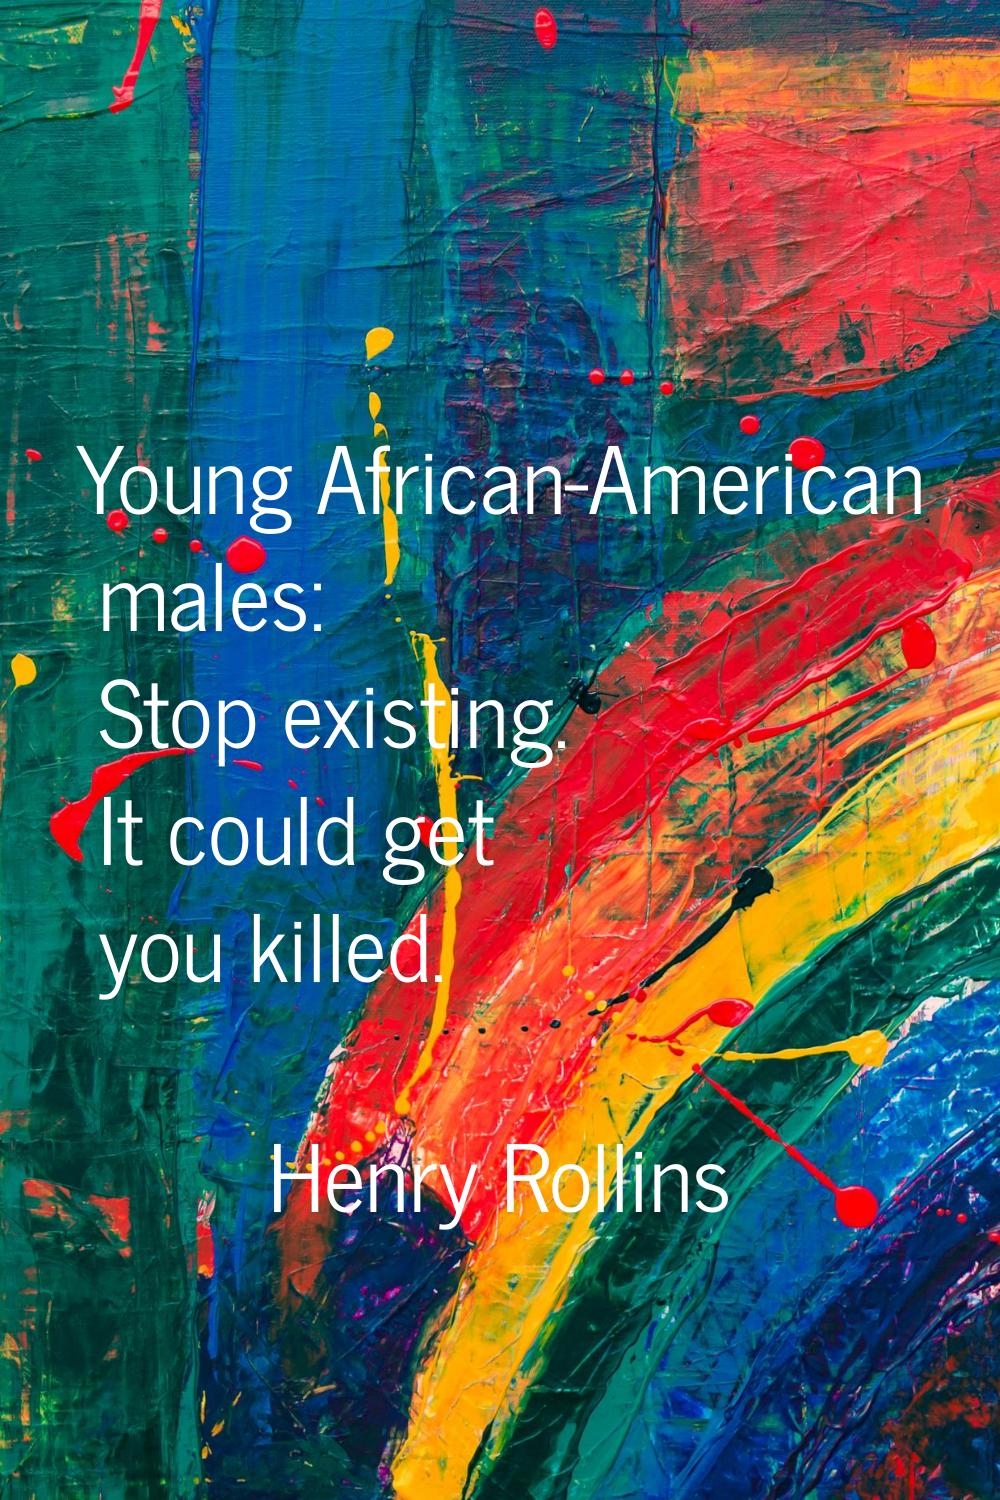 Young African-American males: Stop existing. It could get you killed.